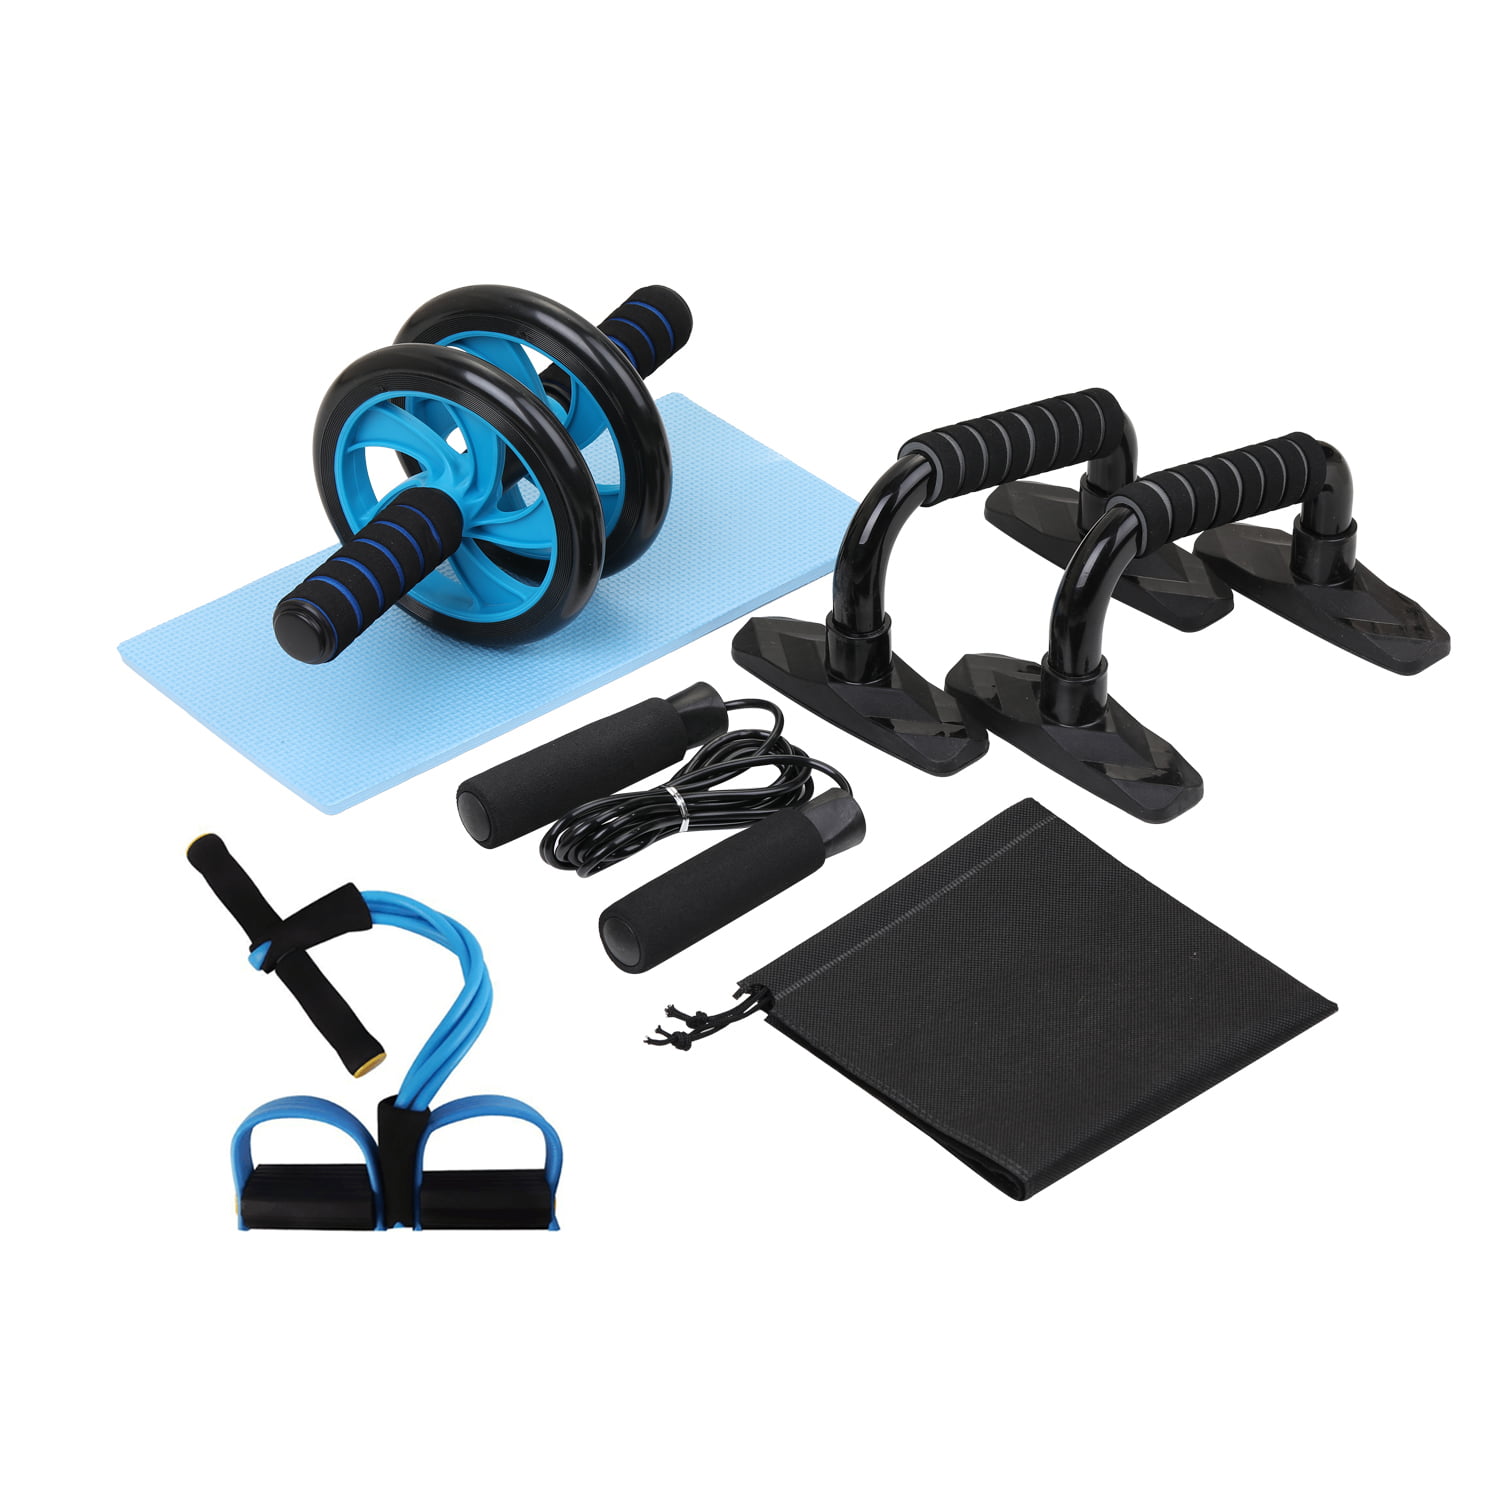 Details about   Ab Roller Wheel Set Home Gym Workout Equipment for Abdominal Core Fitness 